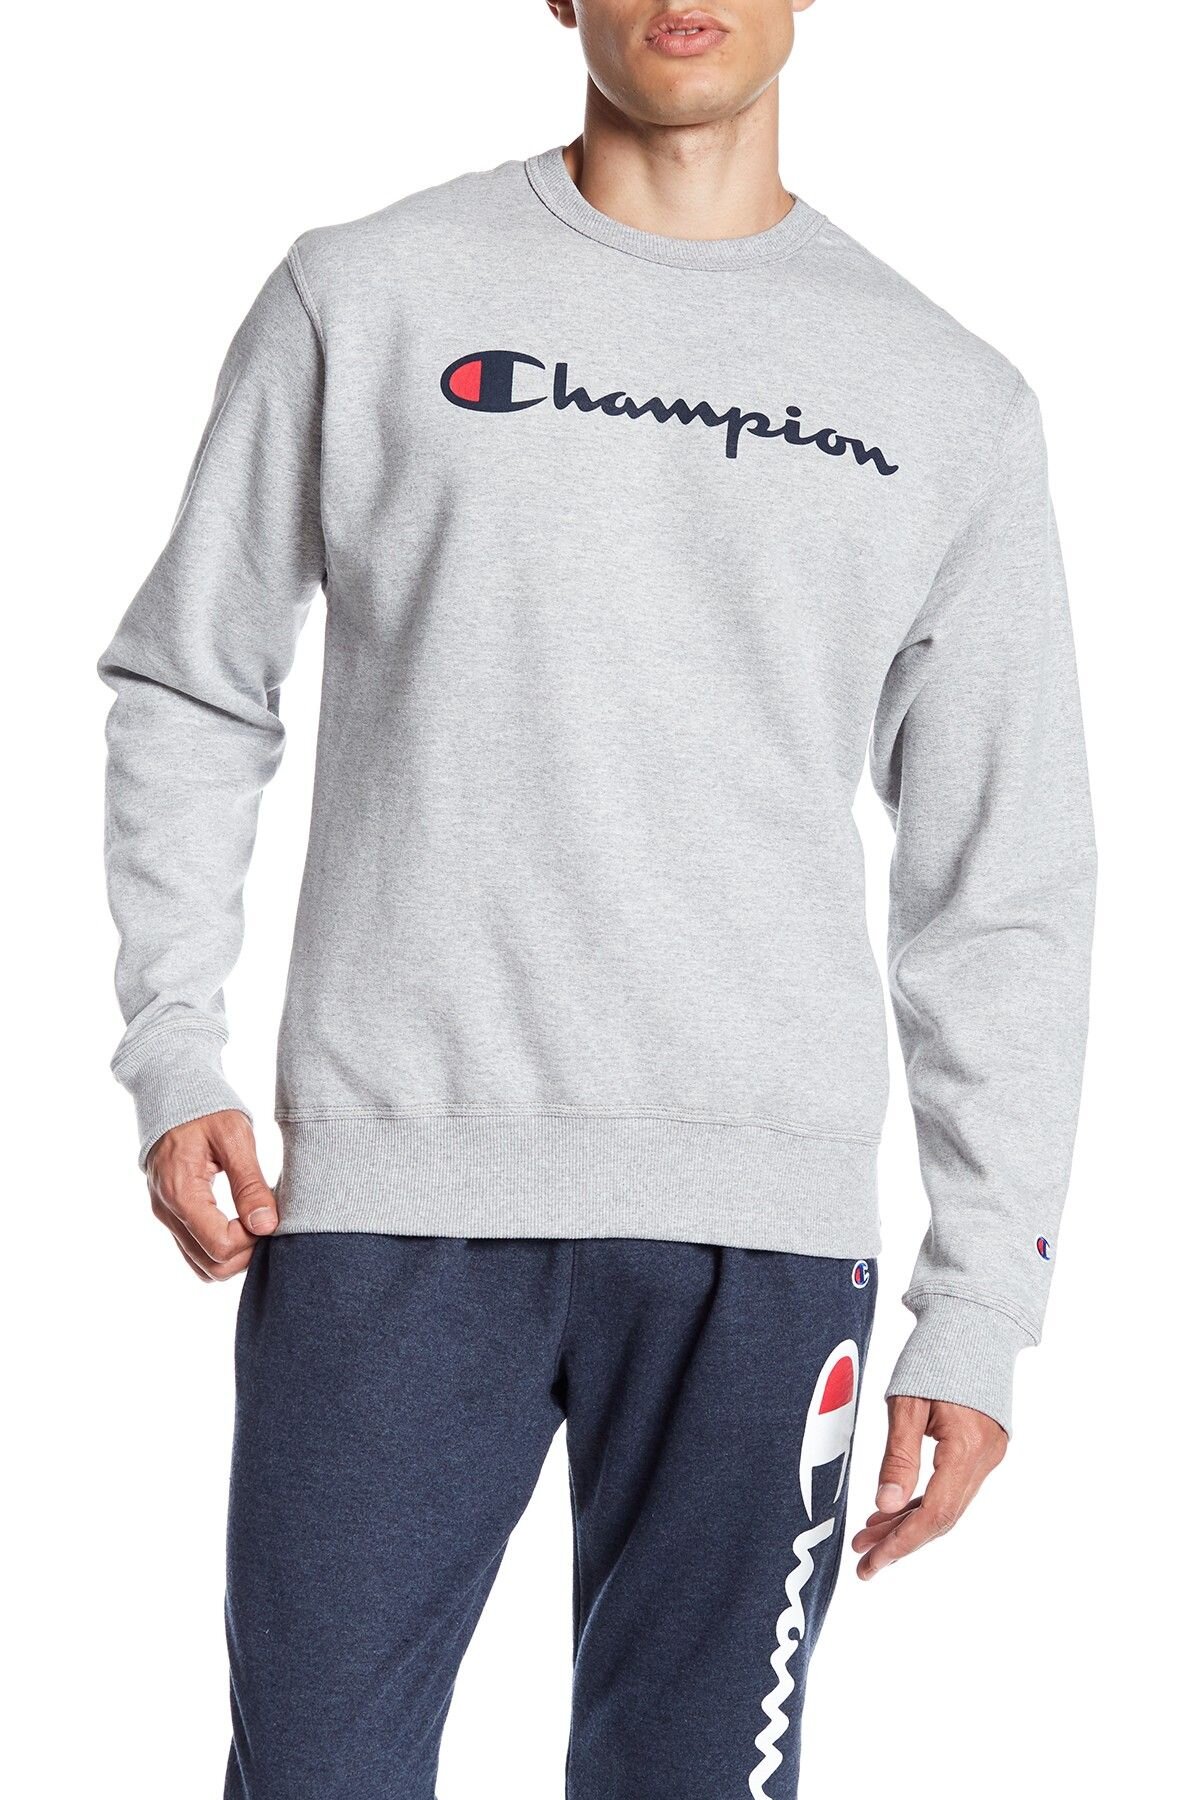 Champion Graphic Powerblend Crew Neck Pullovers On Sale For $13.98 ...